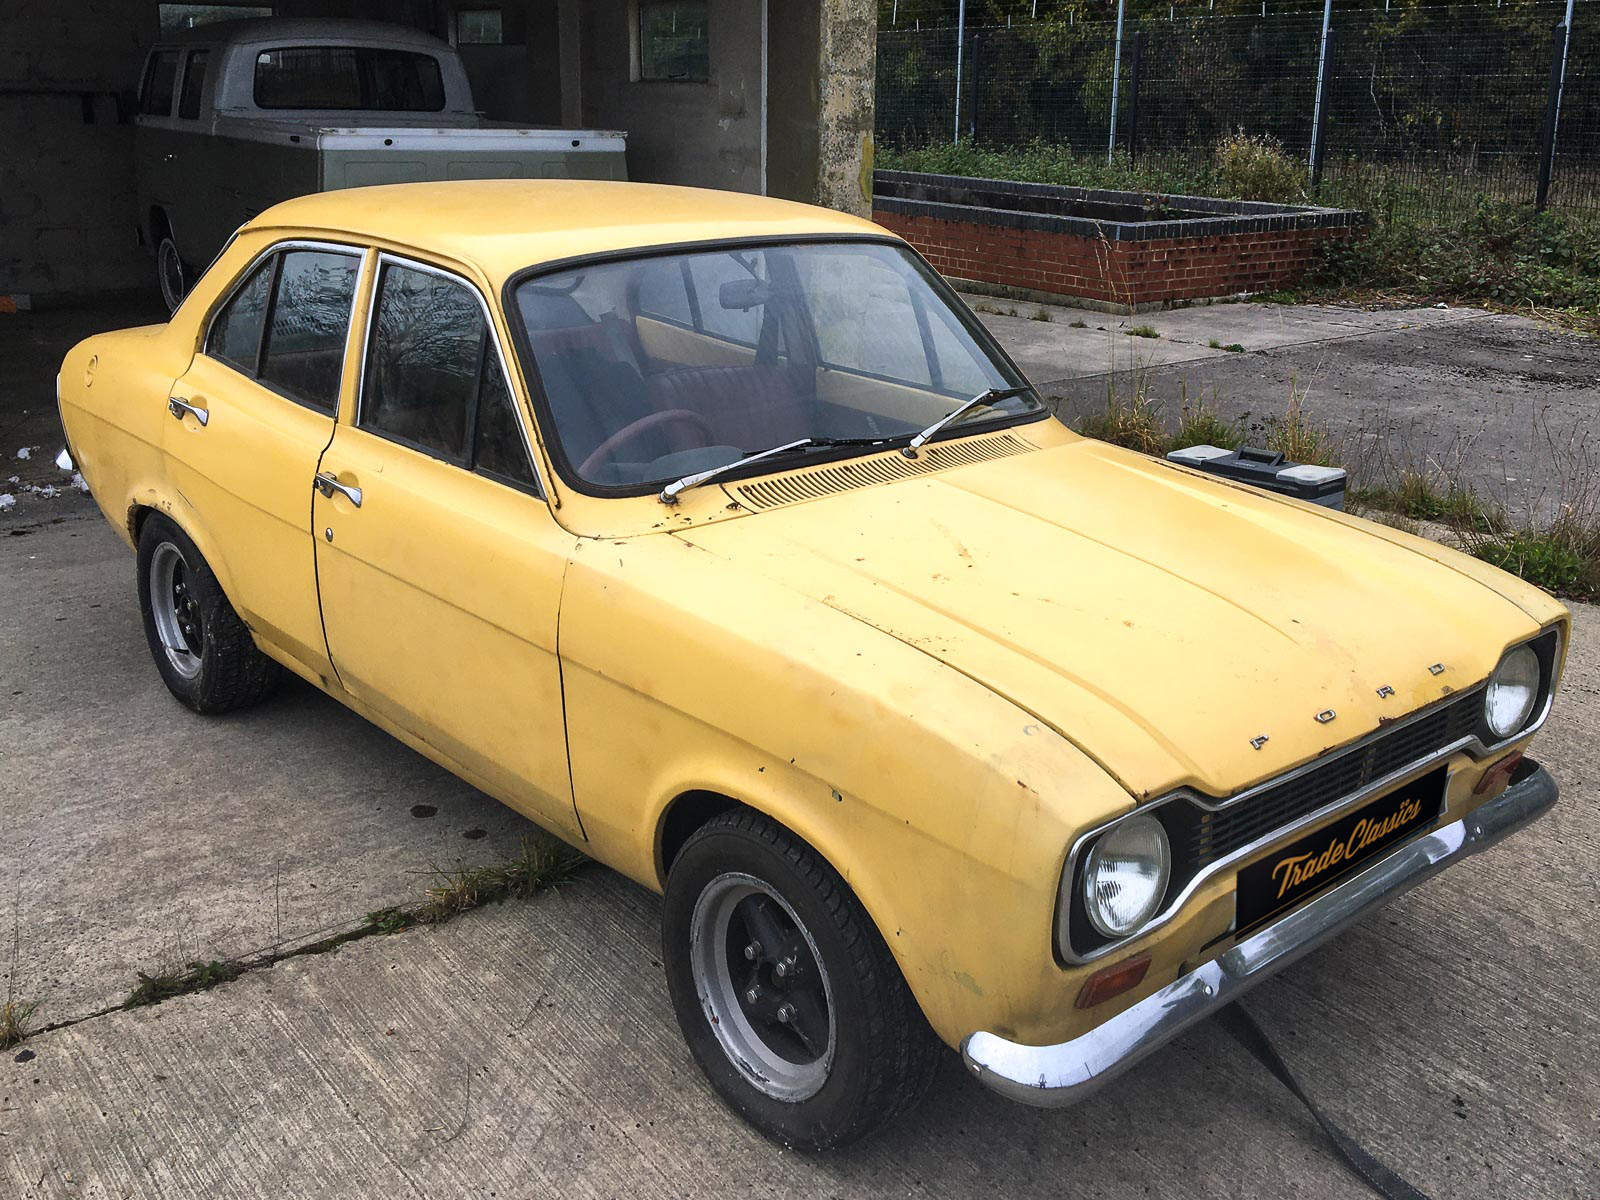 1974 Ford Escort Mk1 (Project) |